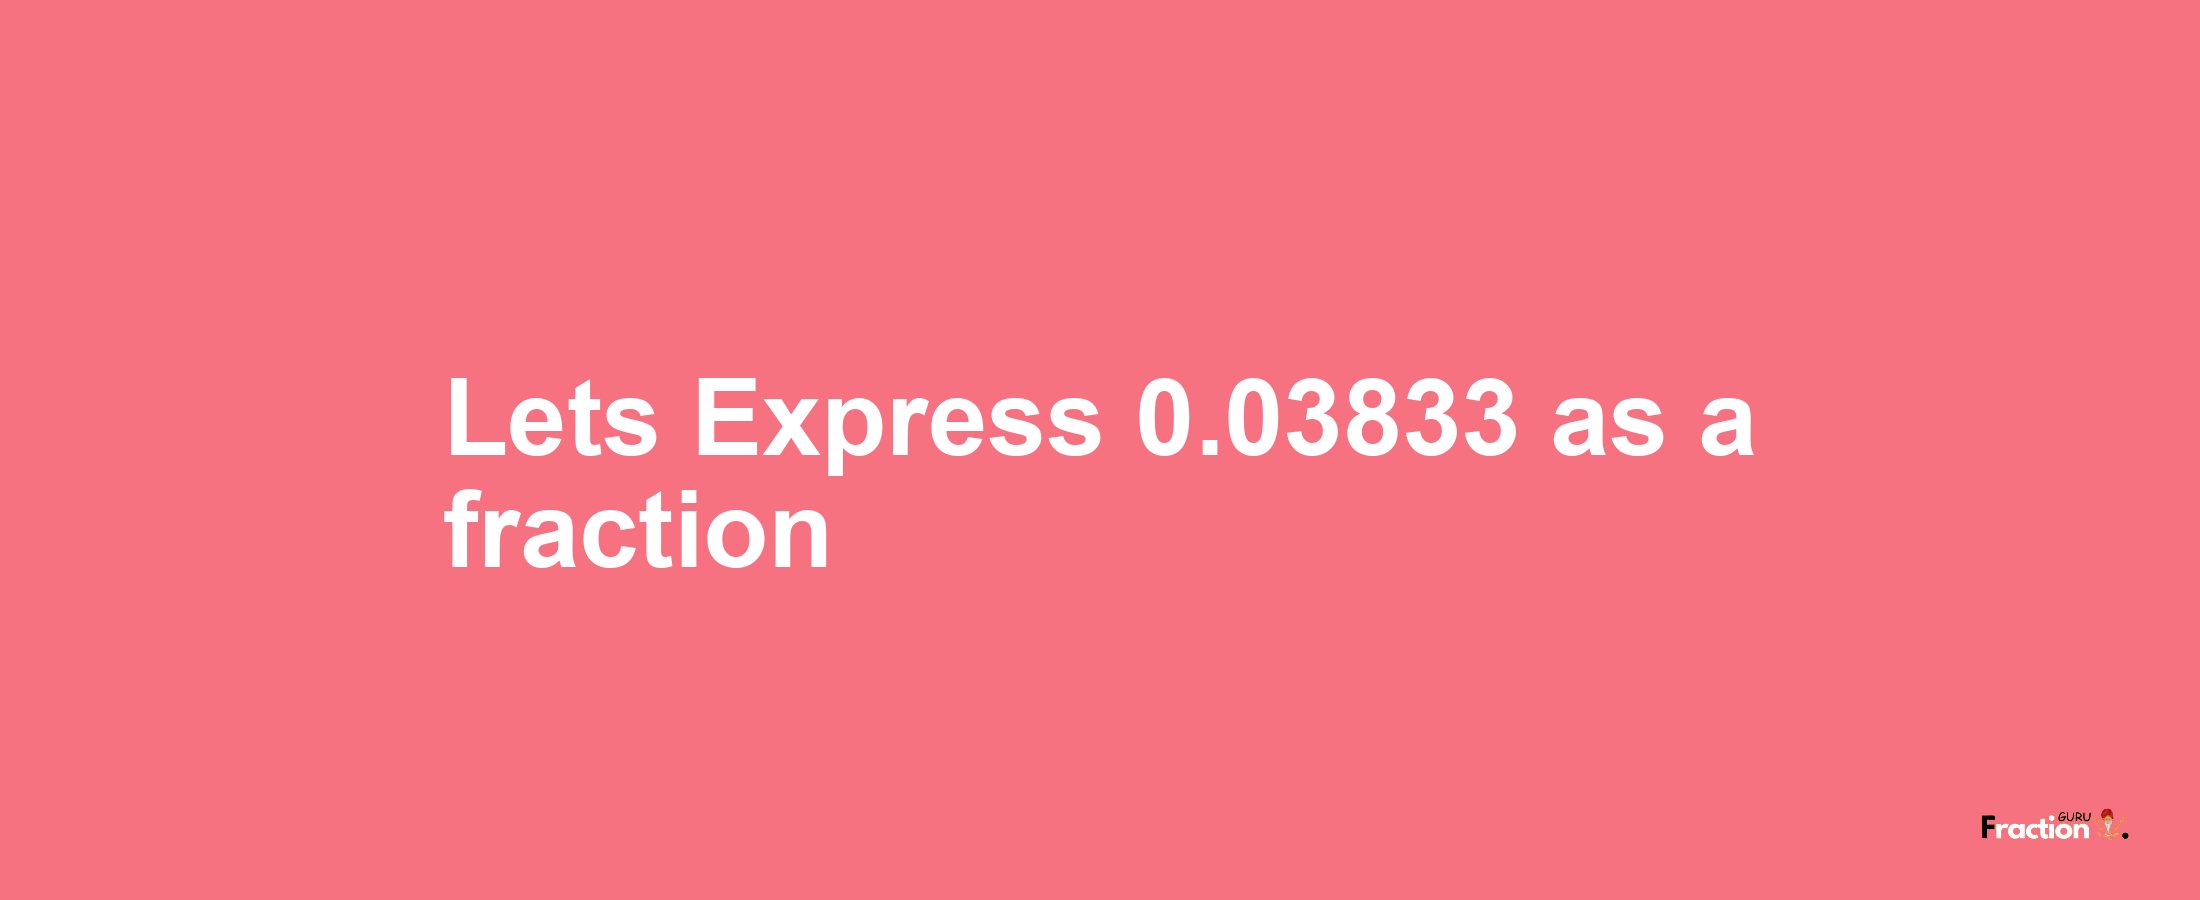 Lets Express 0.03833 as afraction